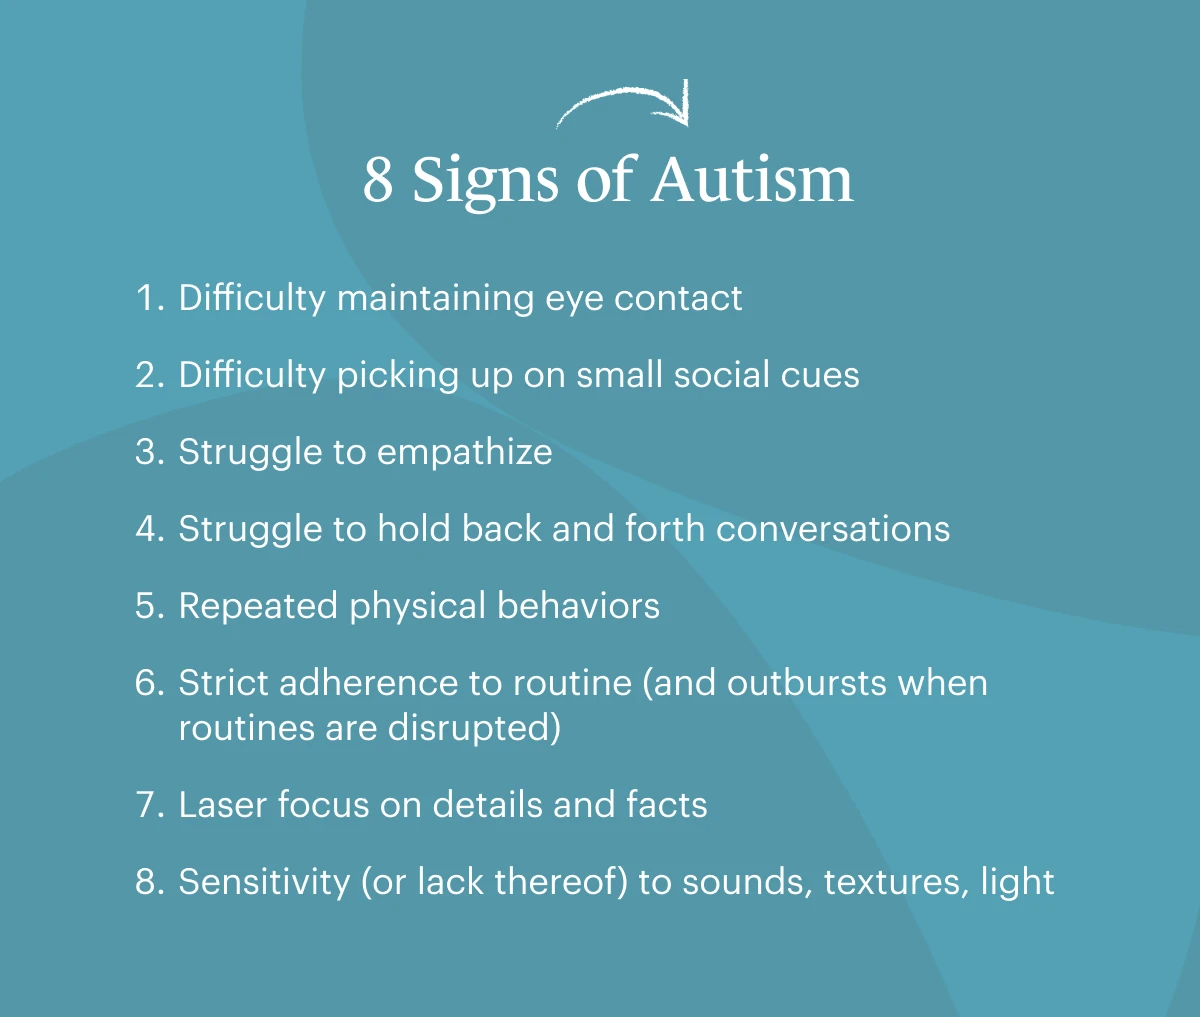 List of 8 signs of autism on a blue patterned background.